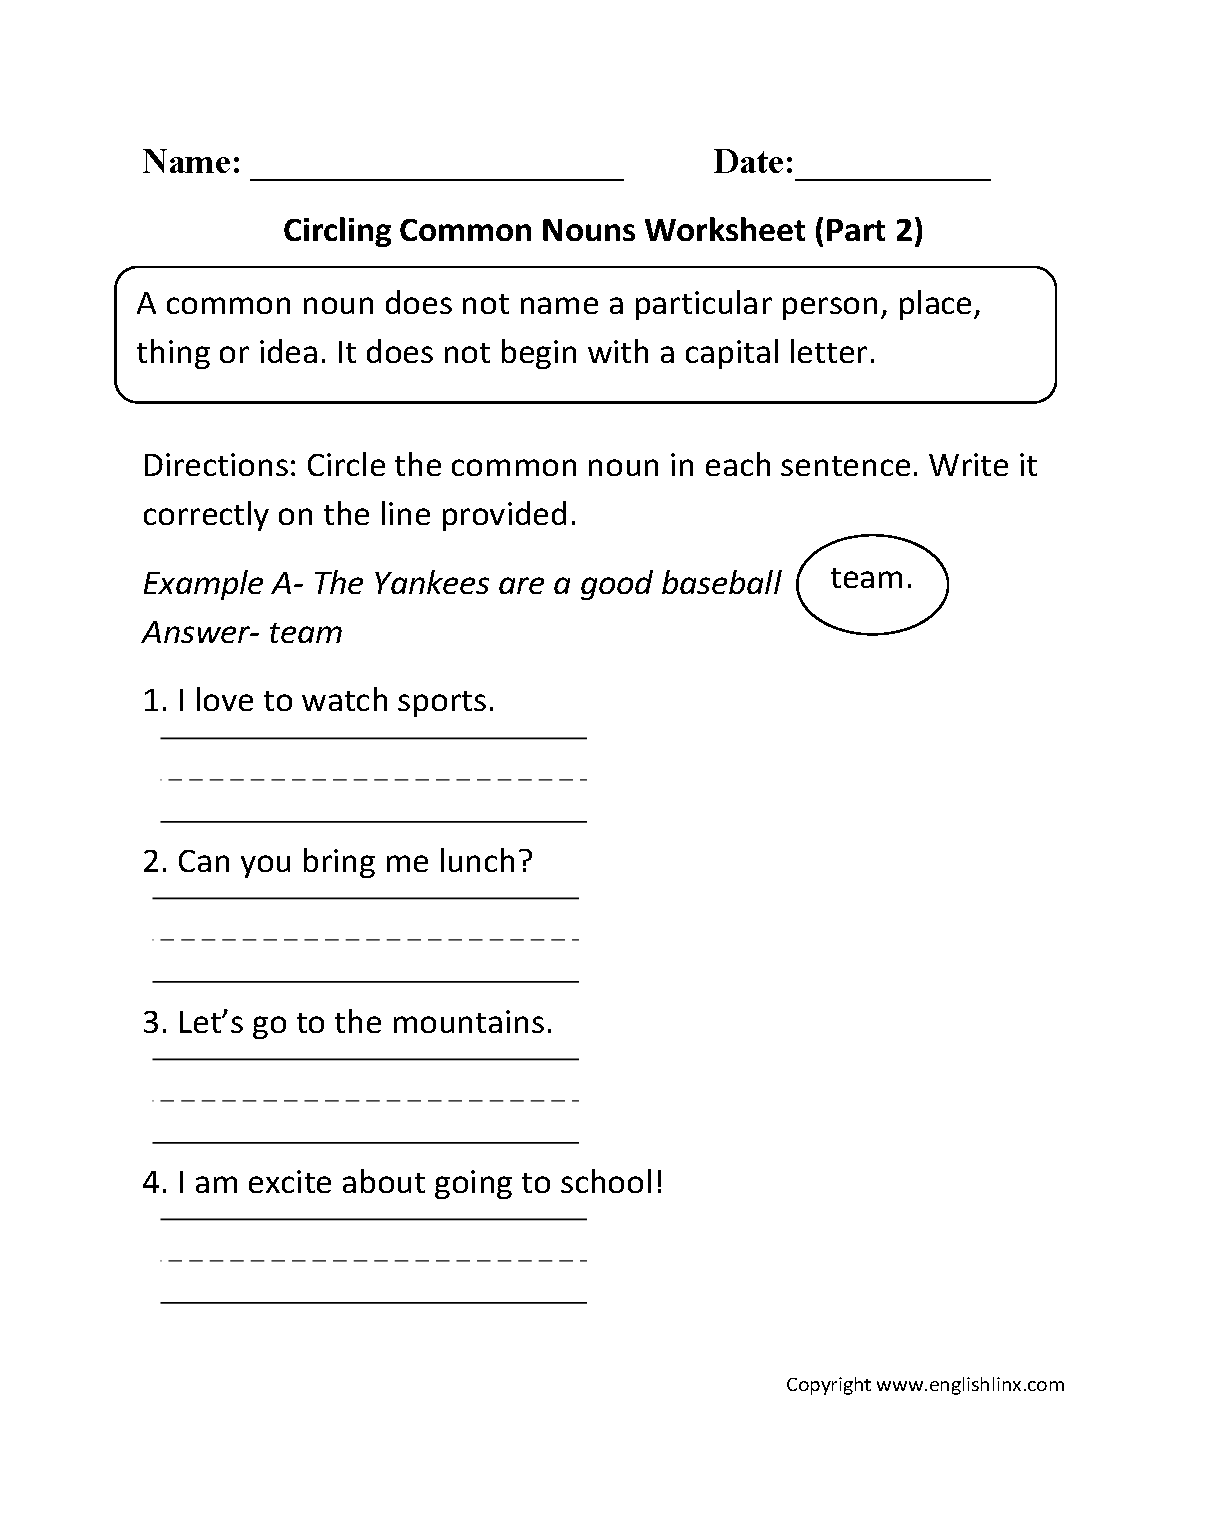 common-noun-and-proper-noun-worksheet-for-class-with-answers-common